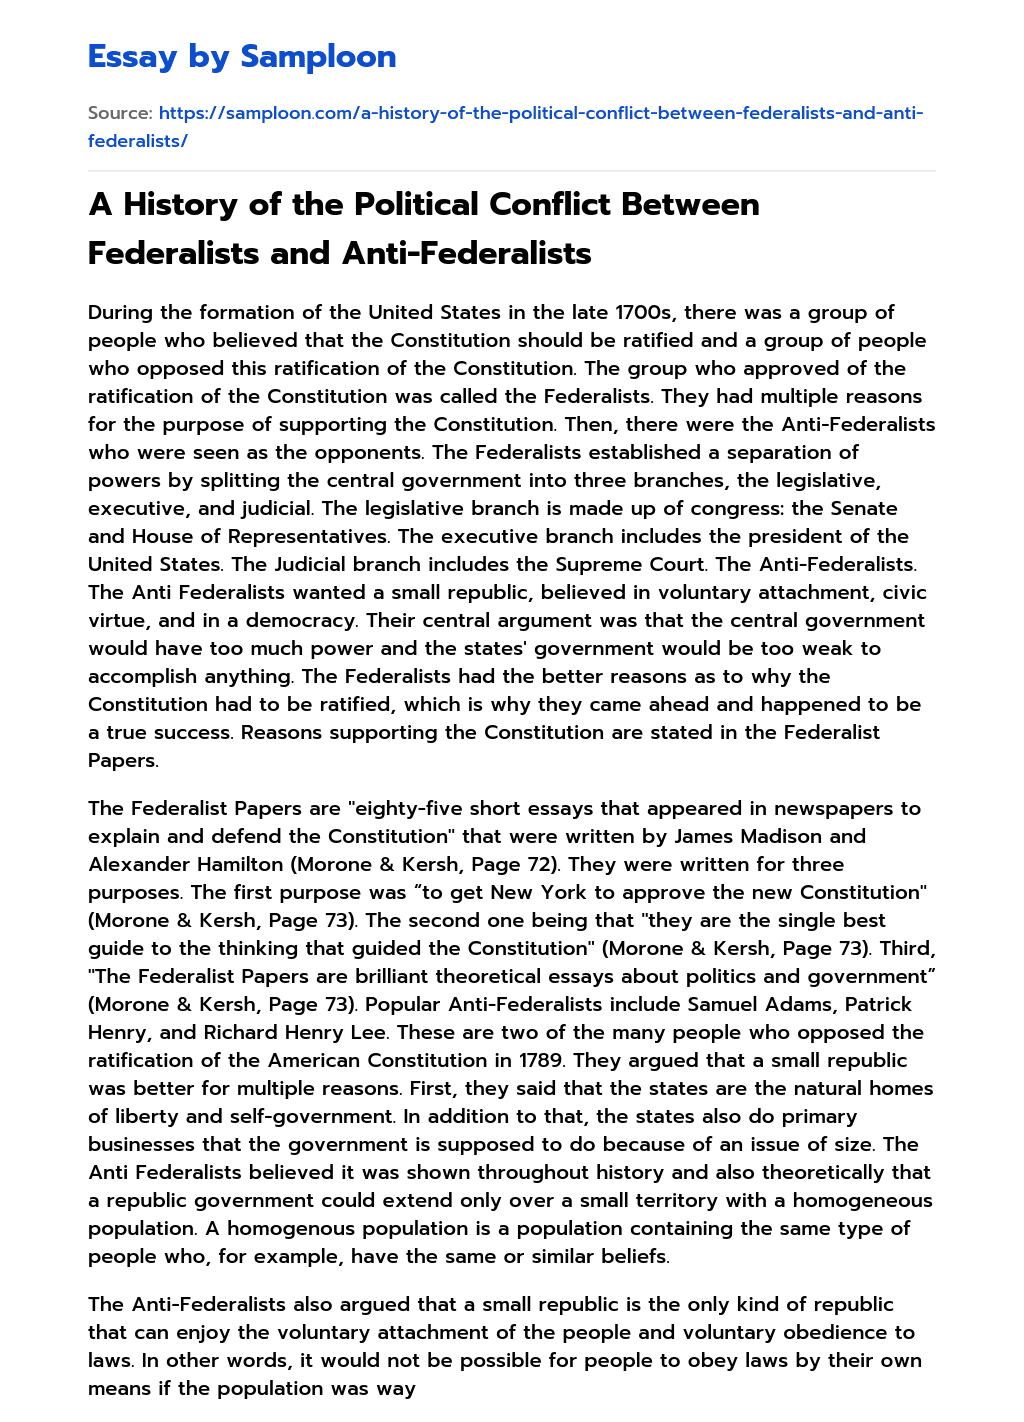 A History of the Political Conflict Between Federalists and Anti-Federalists essay